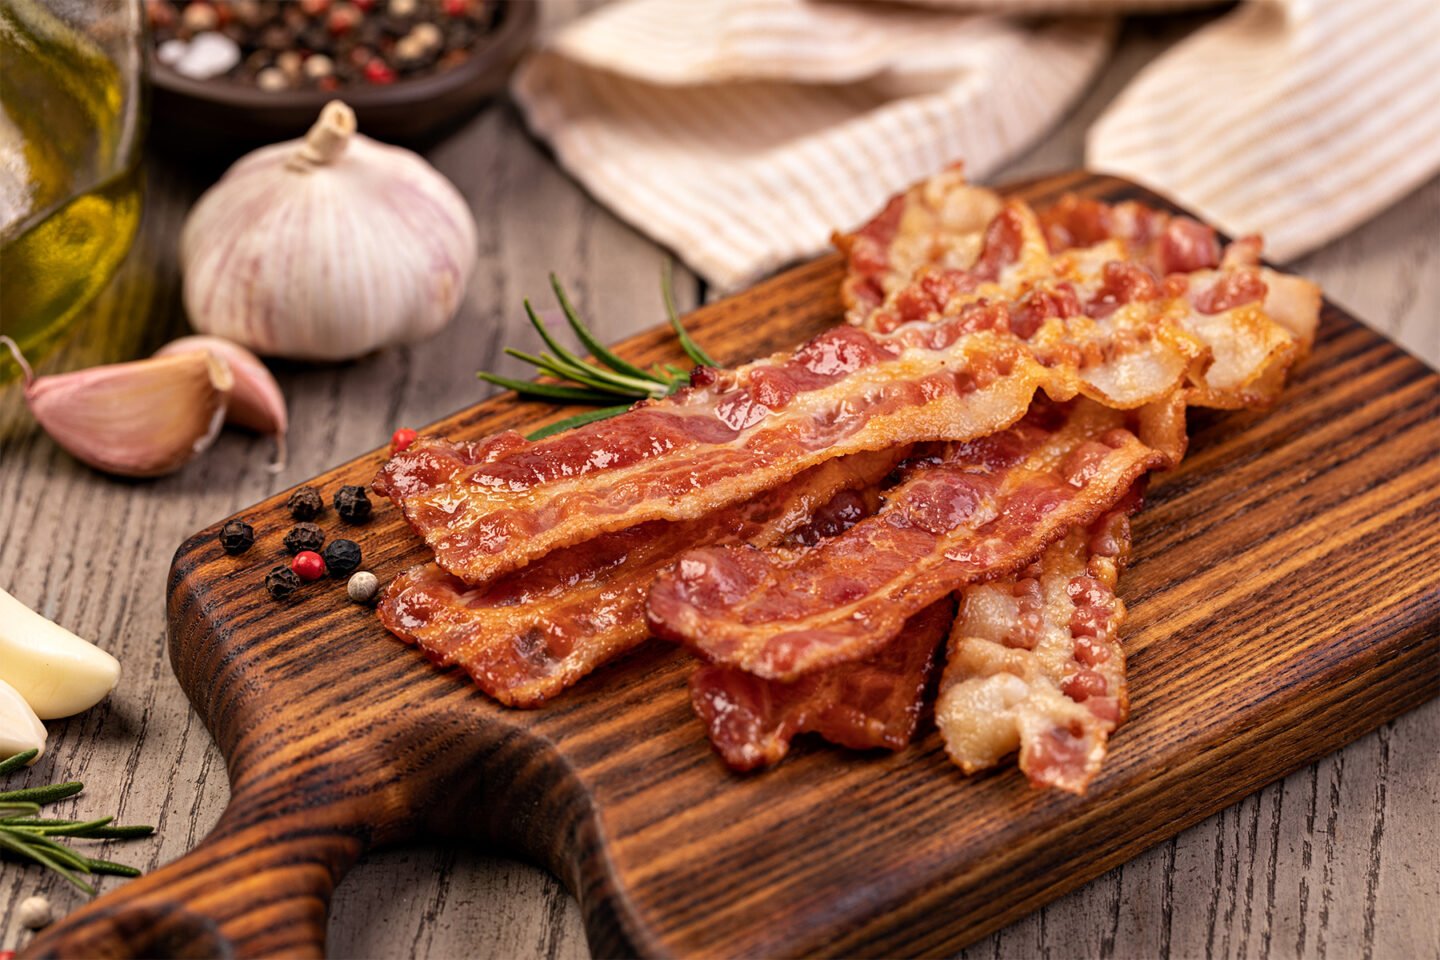 slices of crispy fried bacon